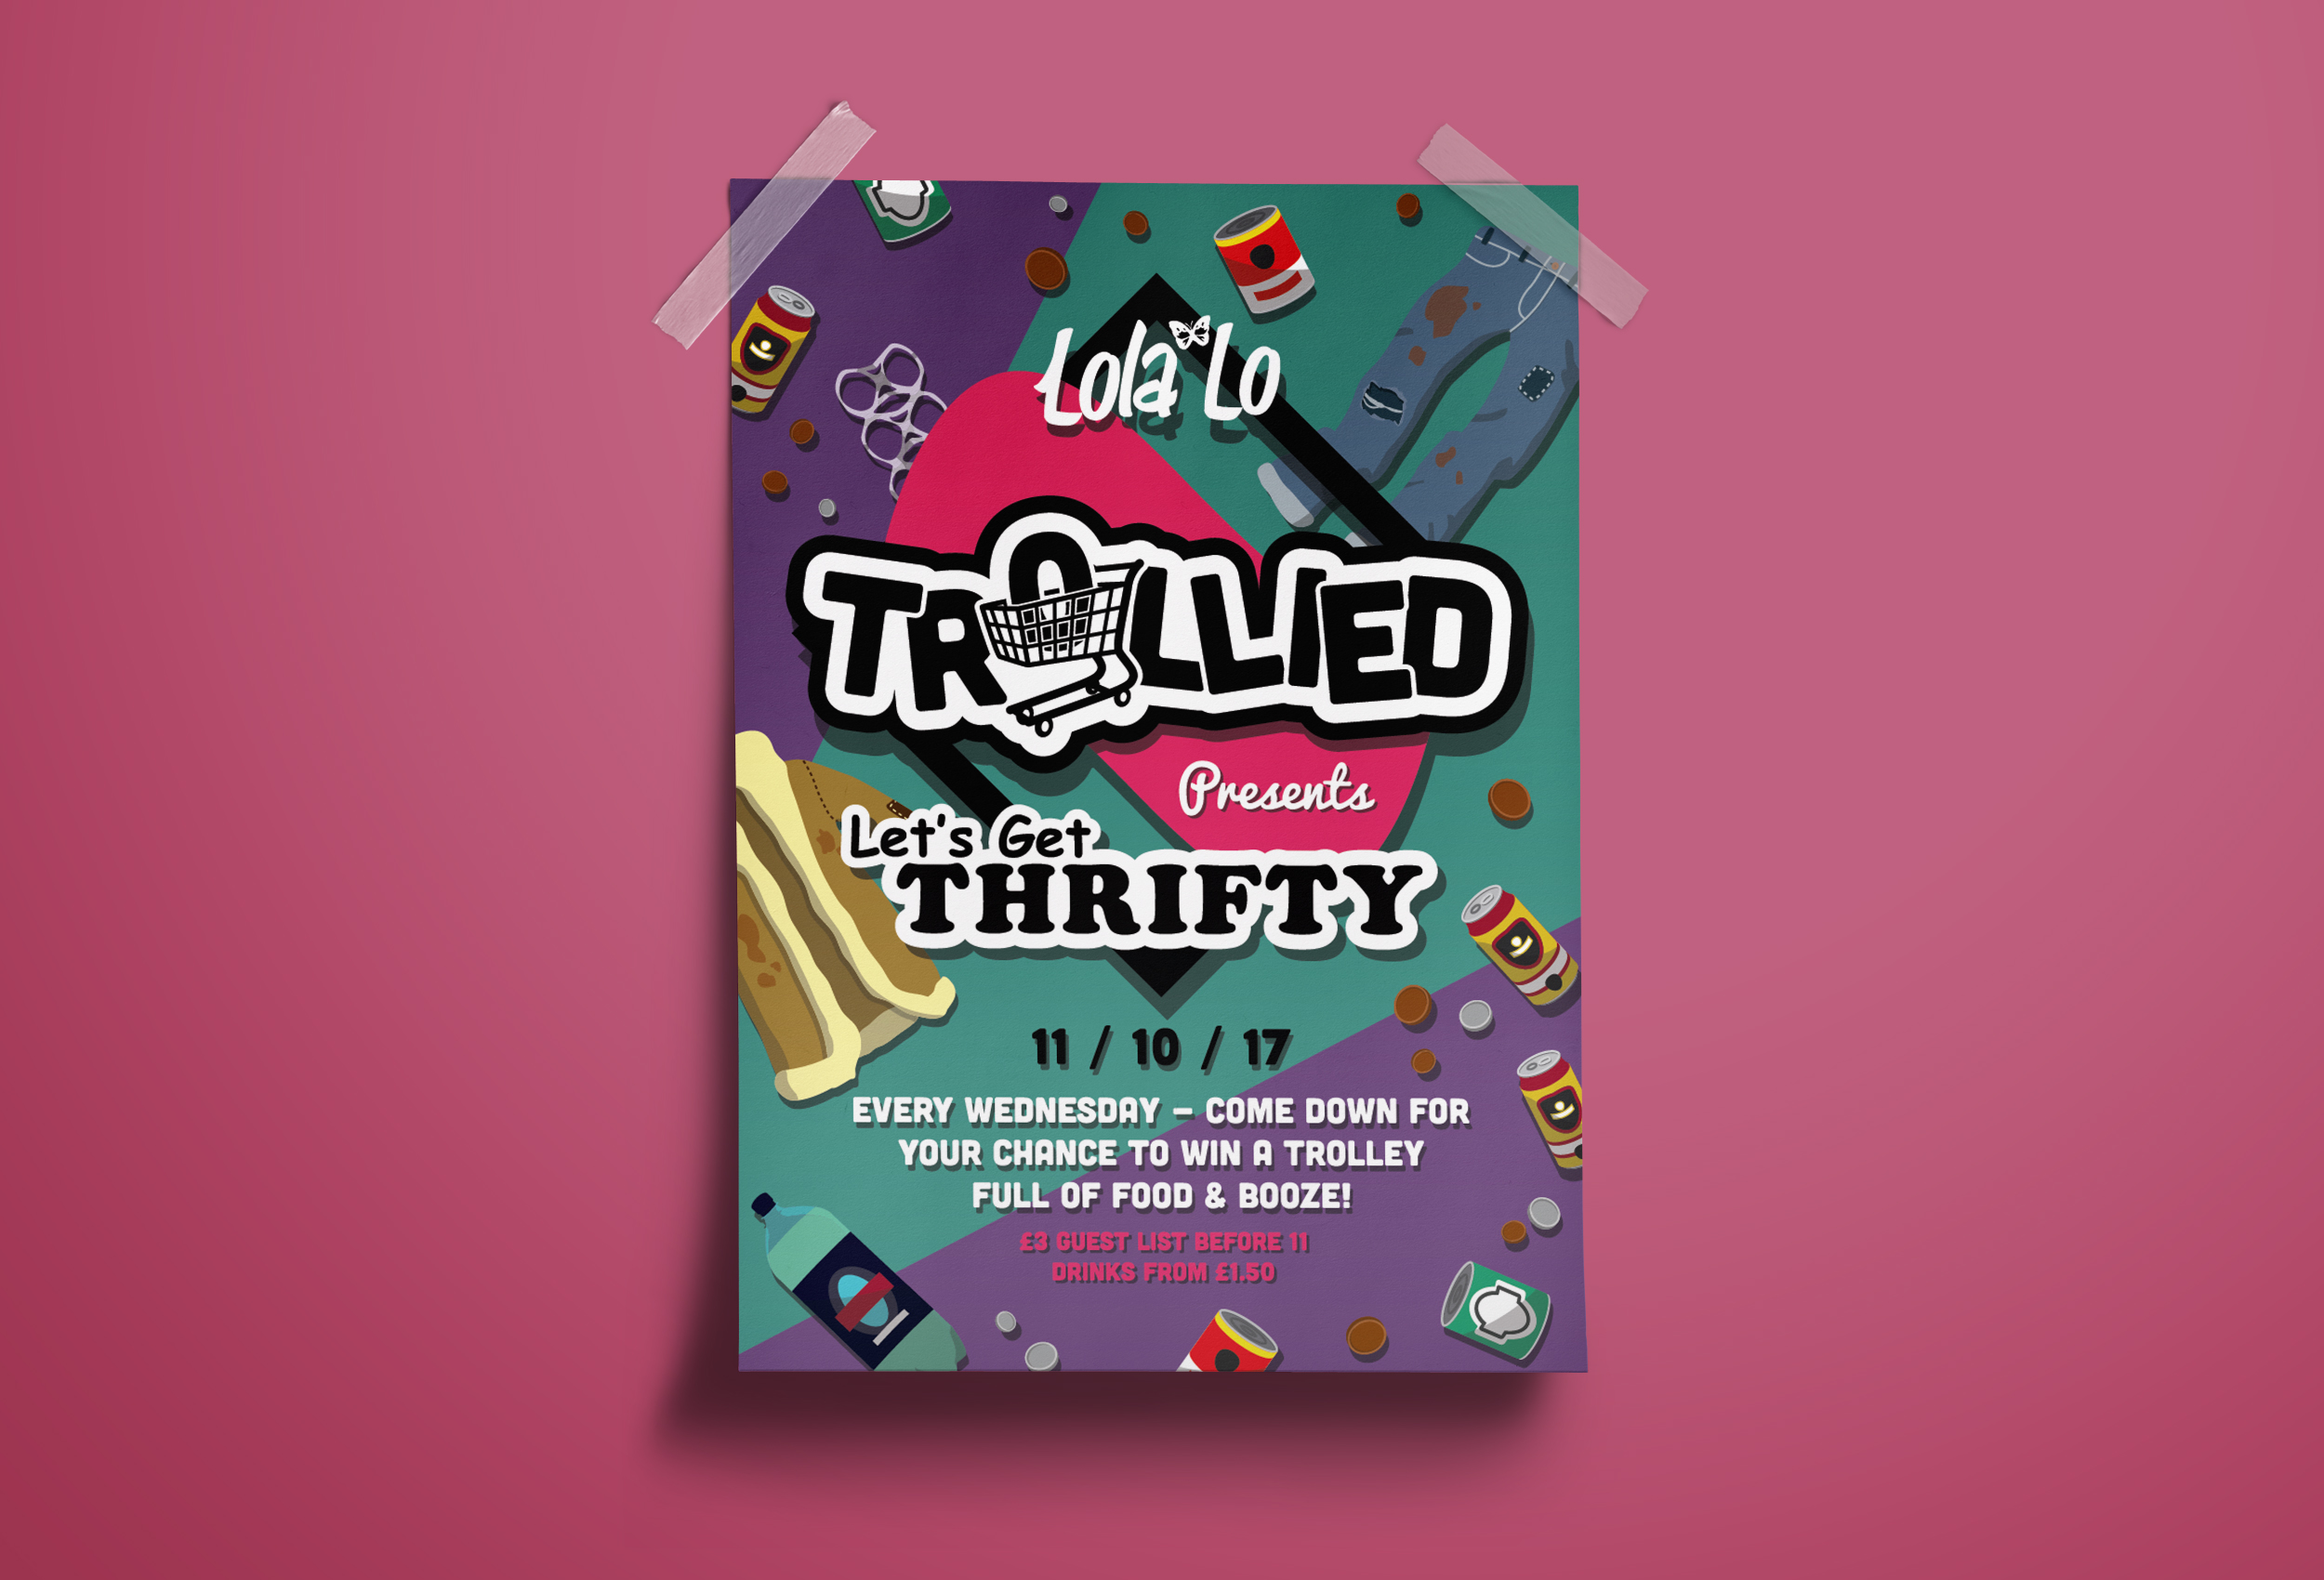 Trollied Let's Get Thrifty poster design.